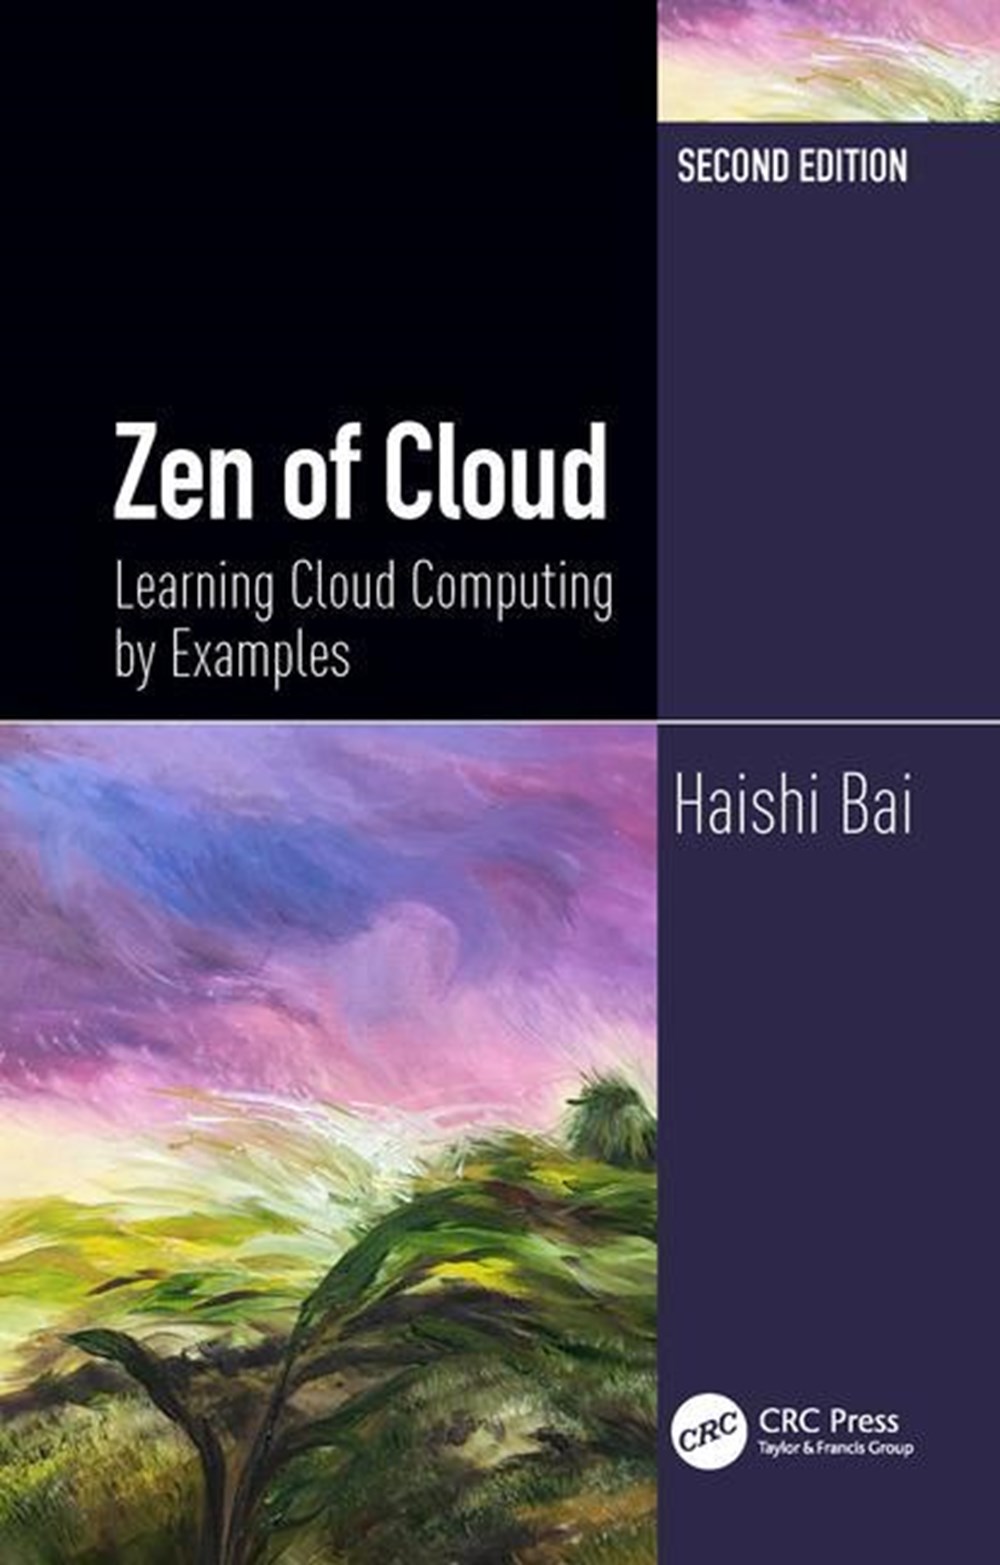 Zen of Cloud: Learning Cloud Computing by Examples, Second Edition